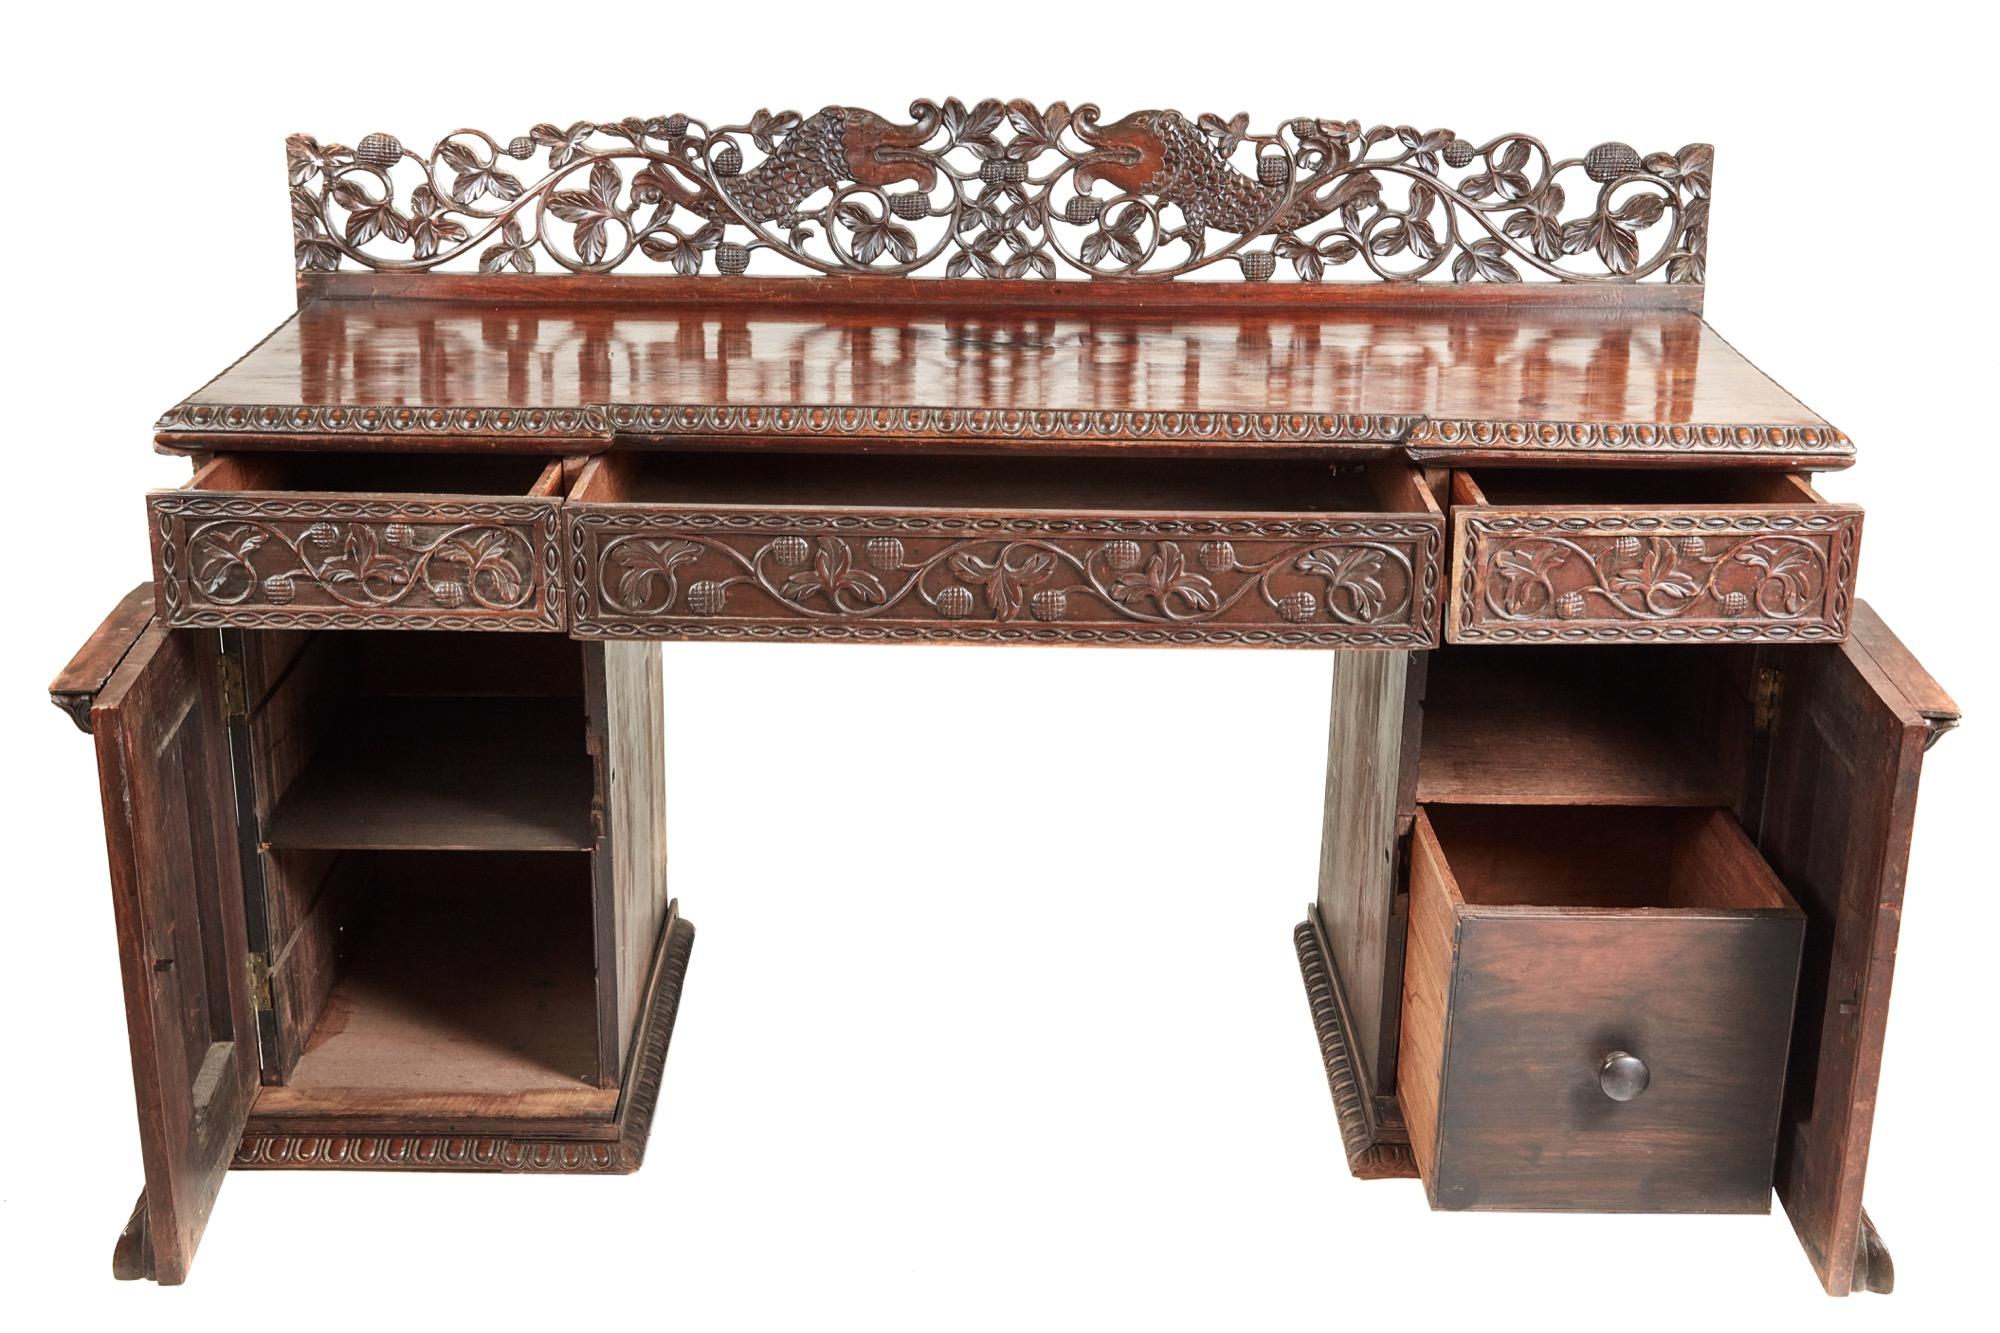 This is a small carved Anglo-Indian padouk inverted breakfront pedestal sideboard. It has a finely carved back with acorn and oak leaves surrounding a lovely pair of carp. The inverted breakfront top with a gadrooned edge, three carved drawers to